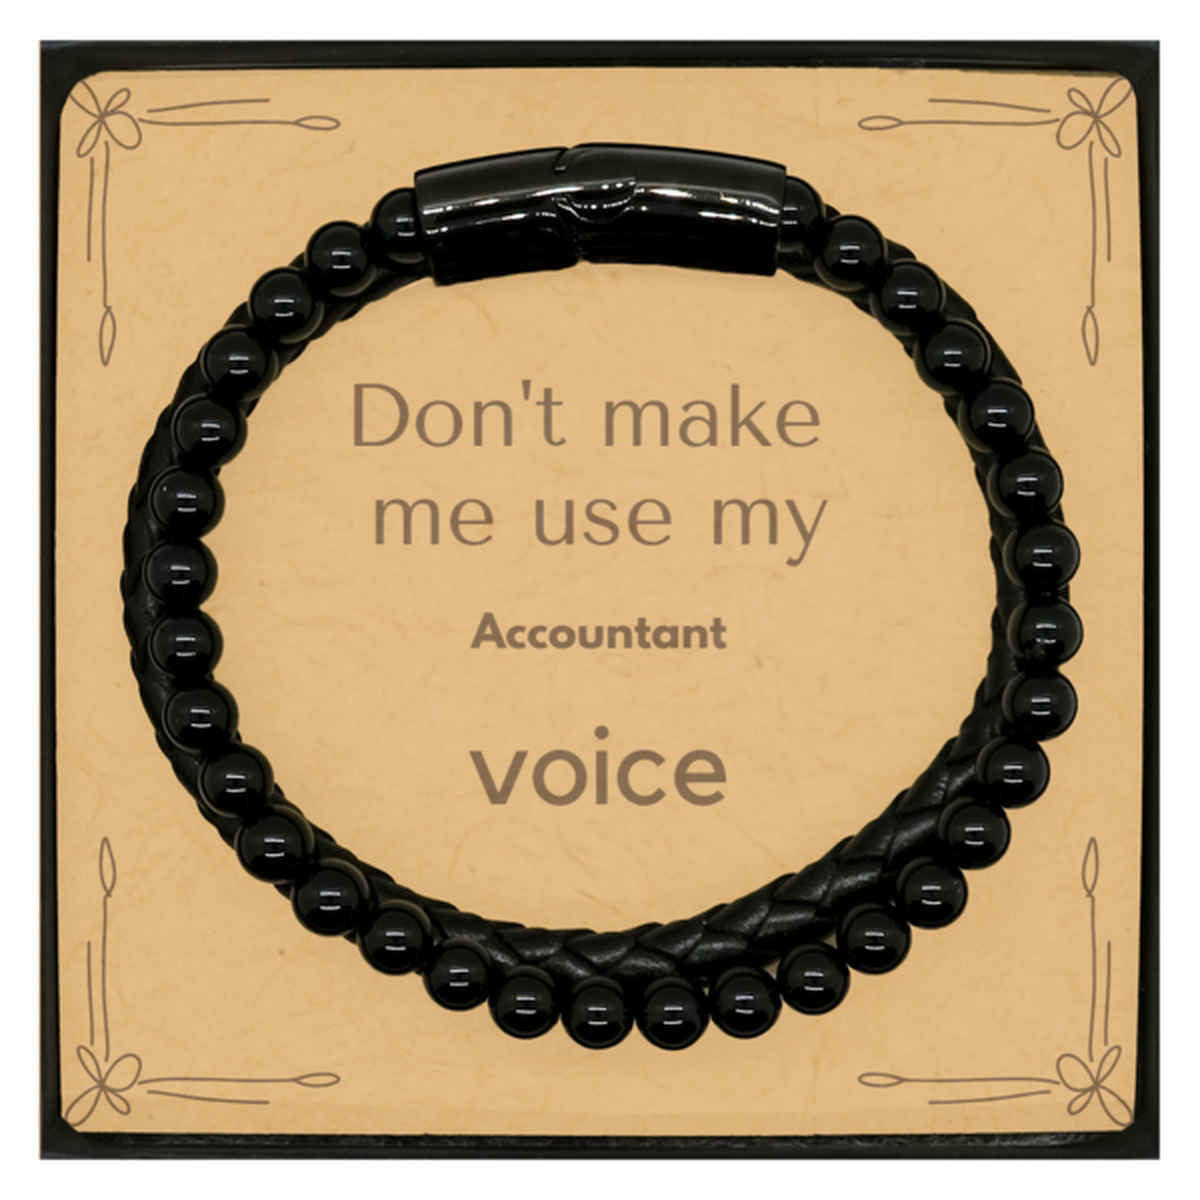 Don't make me use my Accountant voice, Sarcasm Accountant Card Gifts, Christmas Accountant Stone Leather Bracelets Birthday Unique Gifts For Accountant Coworkers, Men, Women, Colleague, Friends